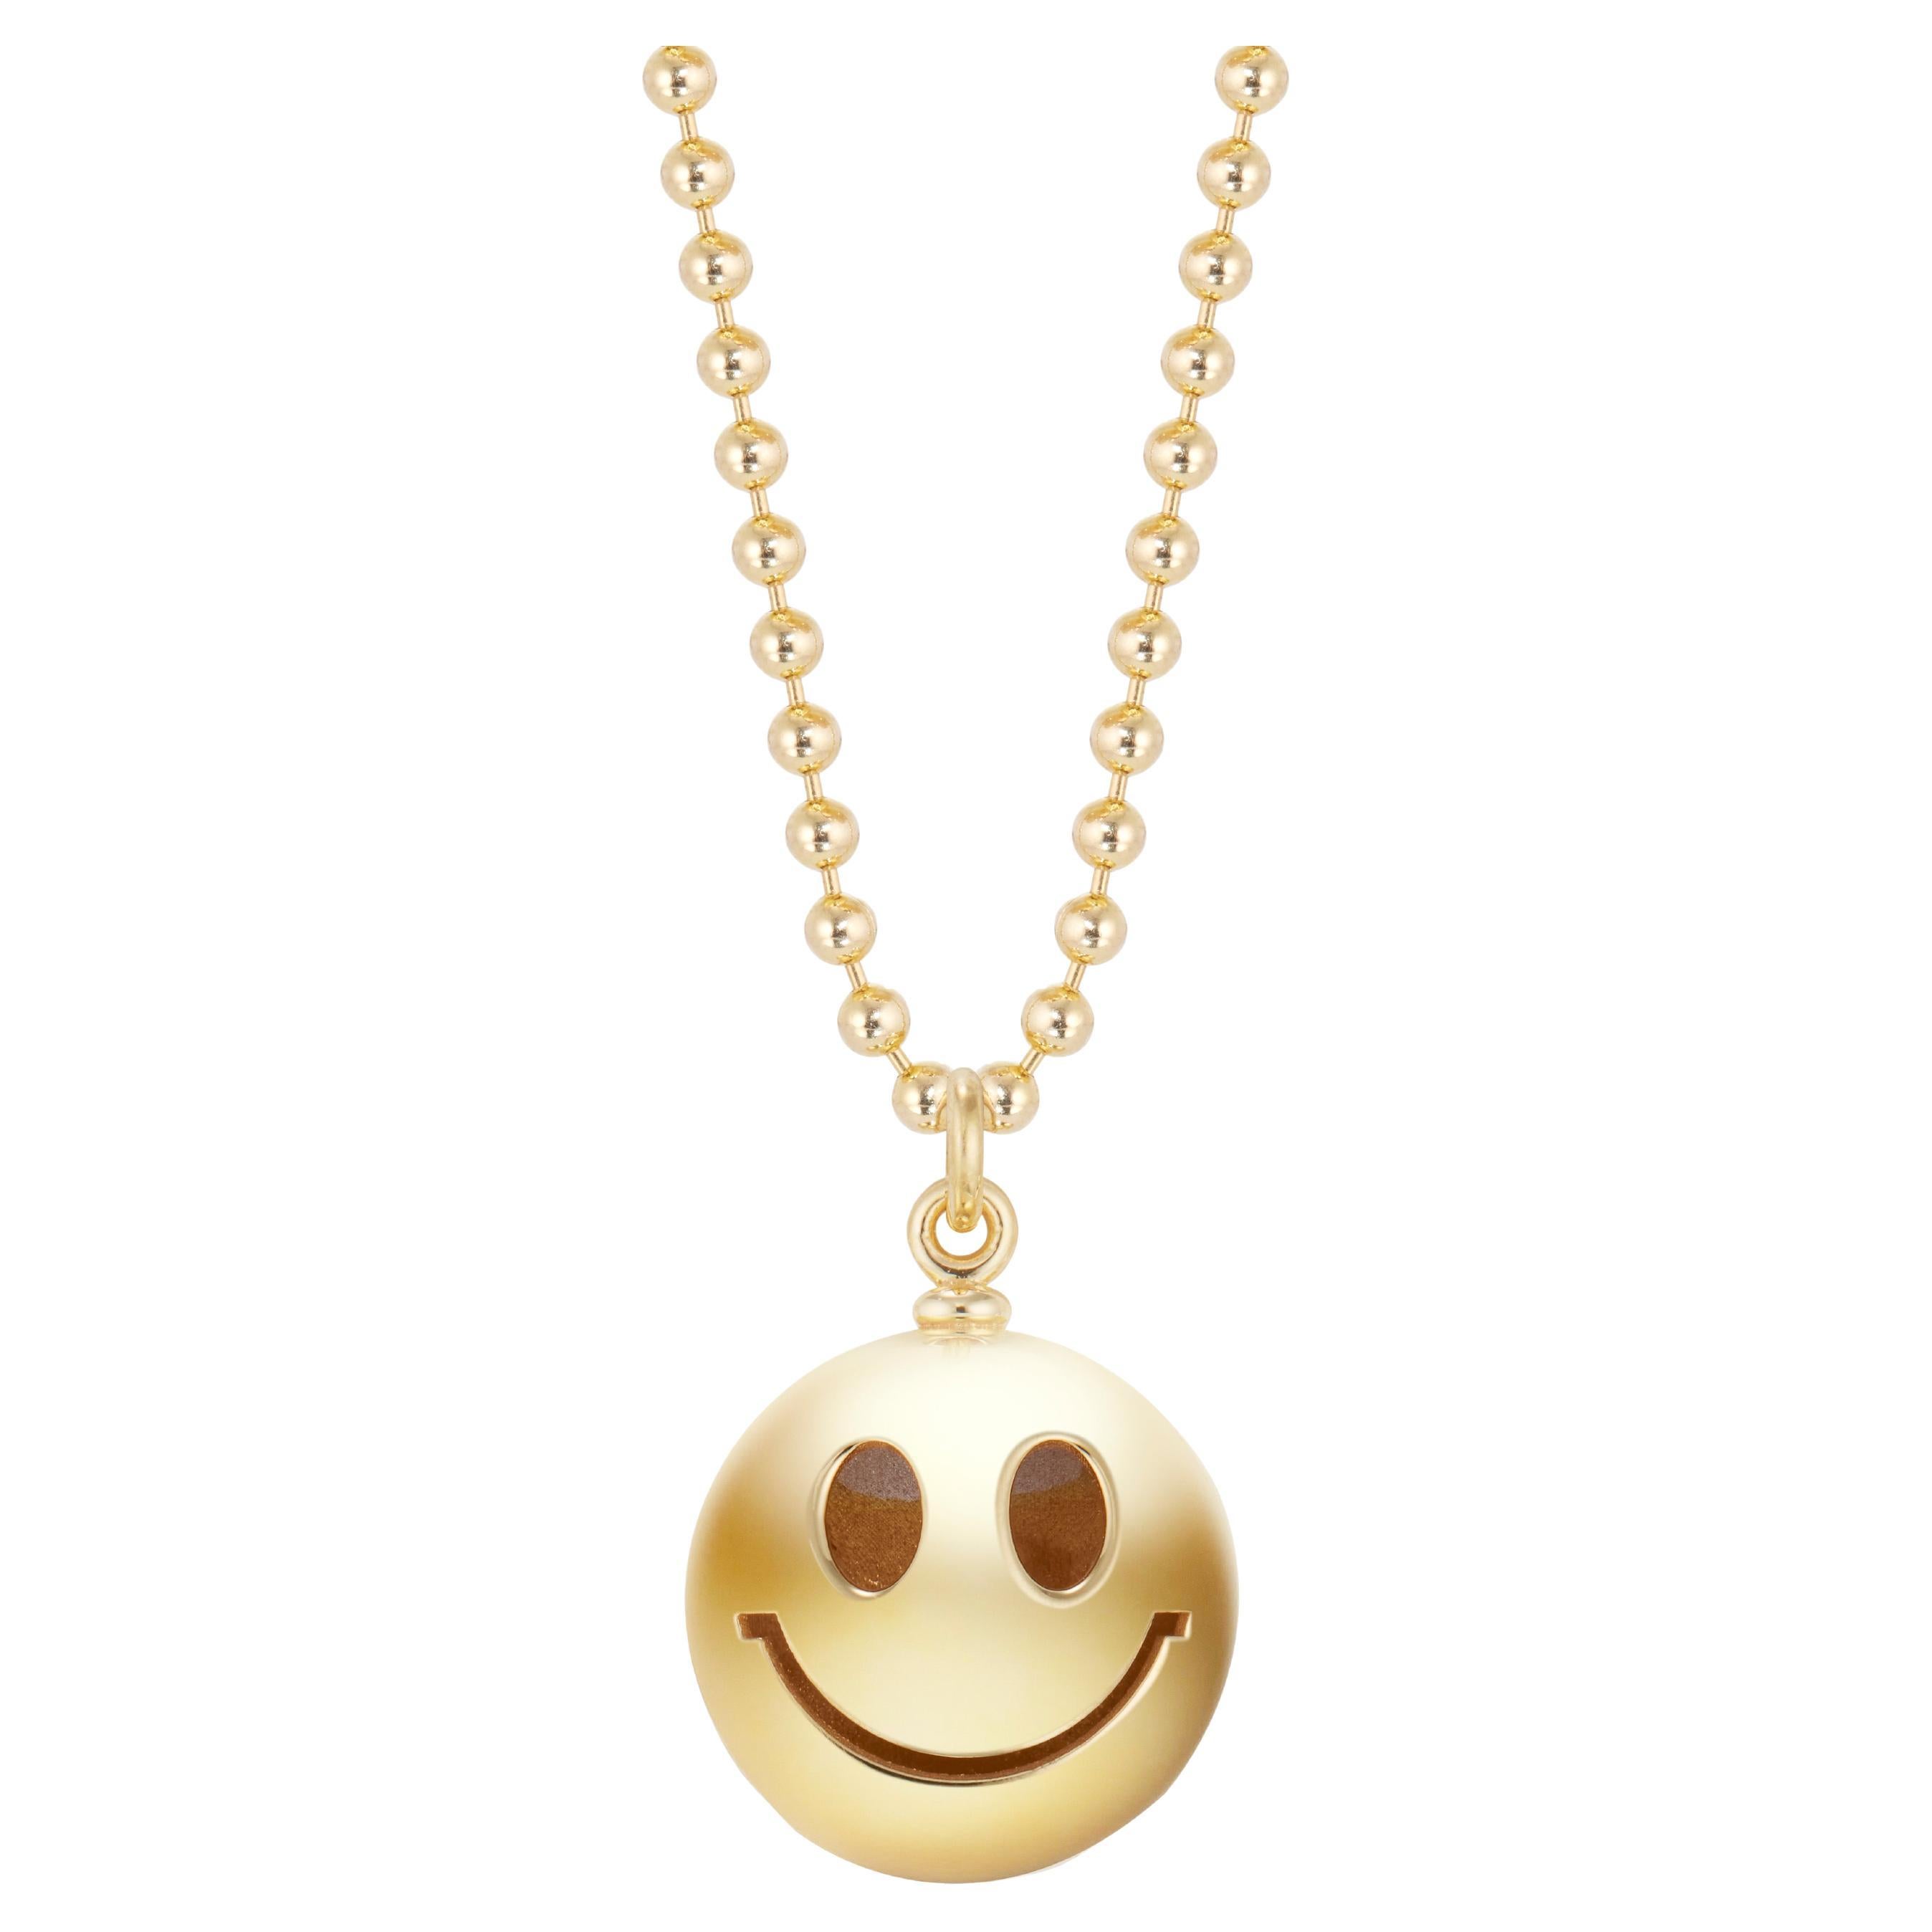 Zoma Design 14 Carat Yellow Gold Smiley Face Pendant Necklace For Sale